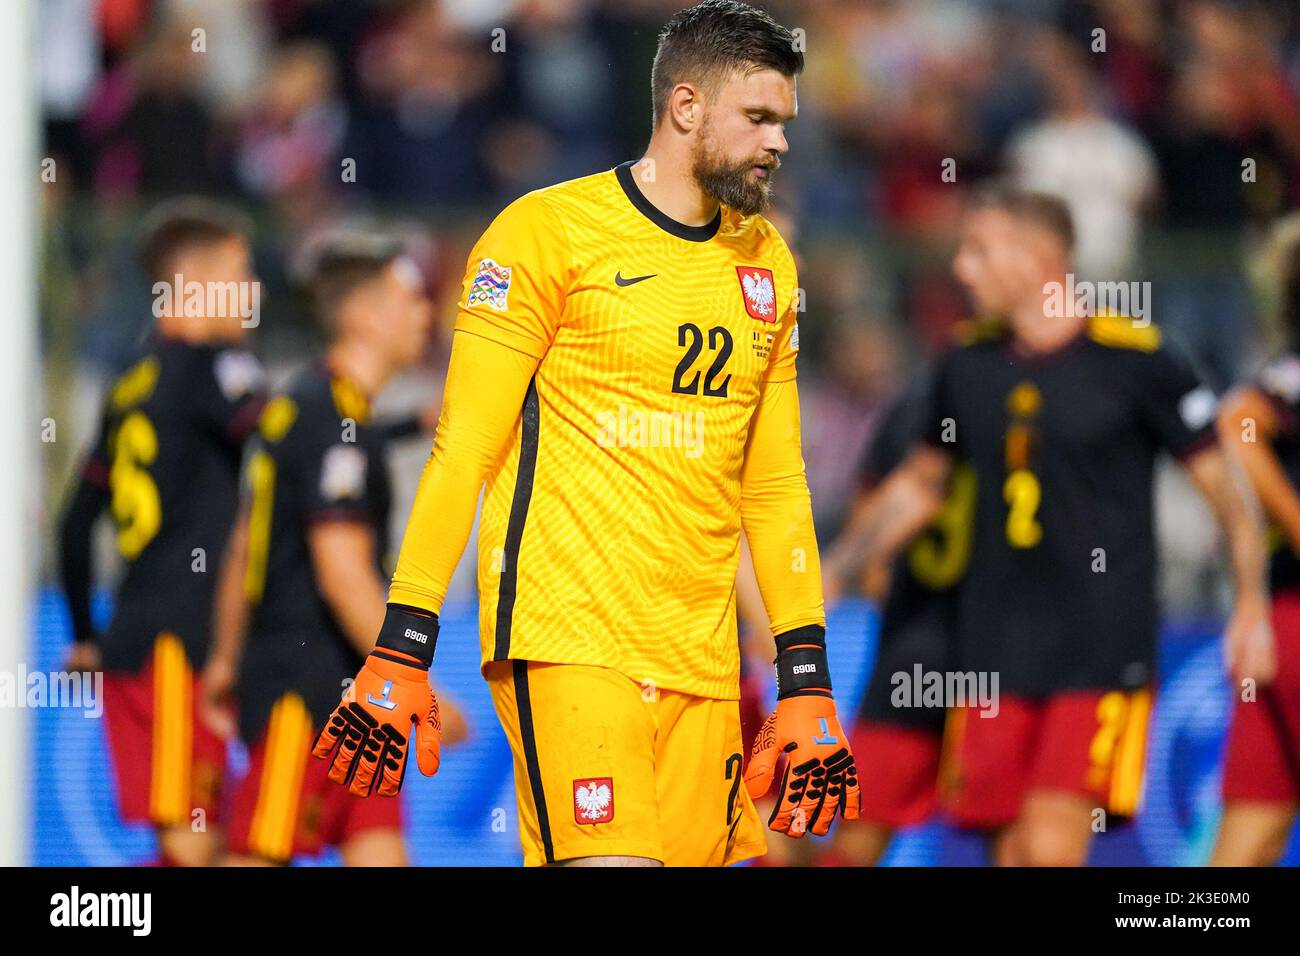 BRUSSELS, BELGIUM - JUNE 8: goalkeeper Bartlomiej Dragowski of Poland looks dejected during the UEFA Nations League A Group 4 match between the Belgium and Poland at the Stade Roi Baudouin on June 8, 2022 in Brussels, Belgium (Photo by Joris Verwijst/Orange Pictures) Stock Photo